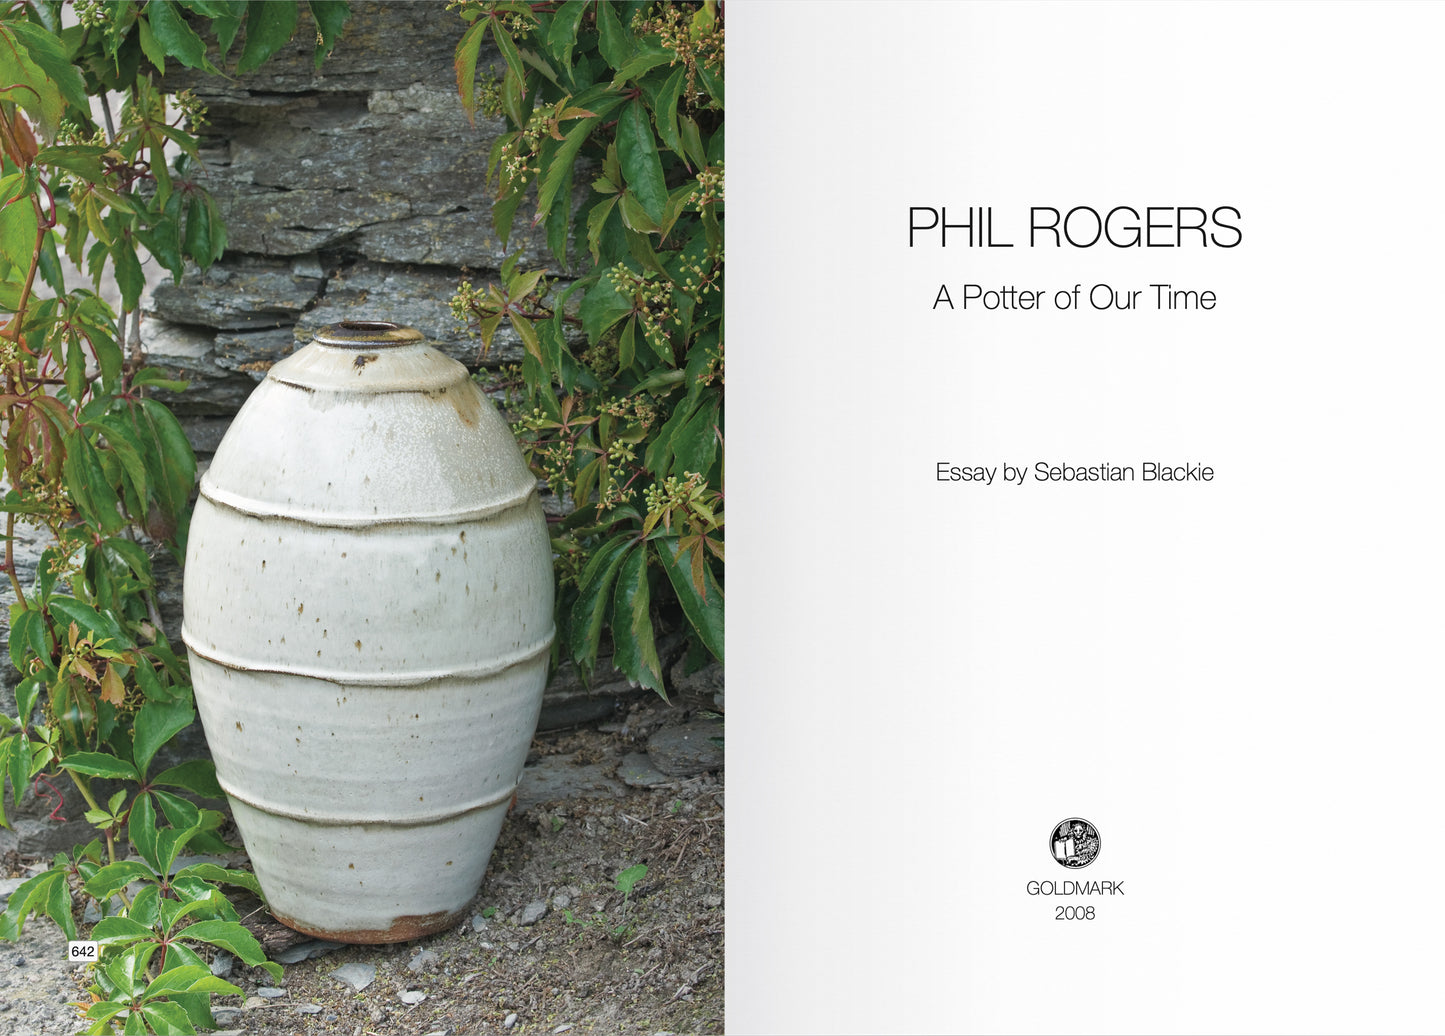 Phil Rogers - A Potter of Our Time